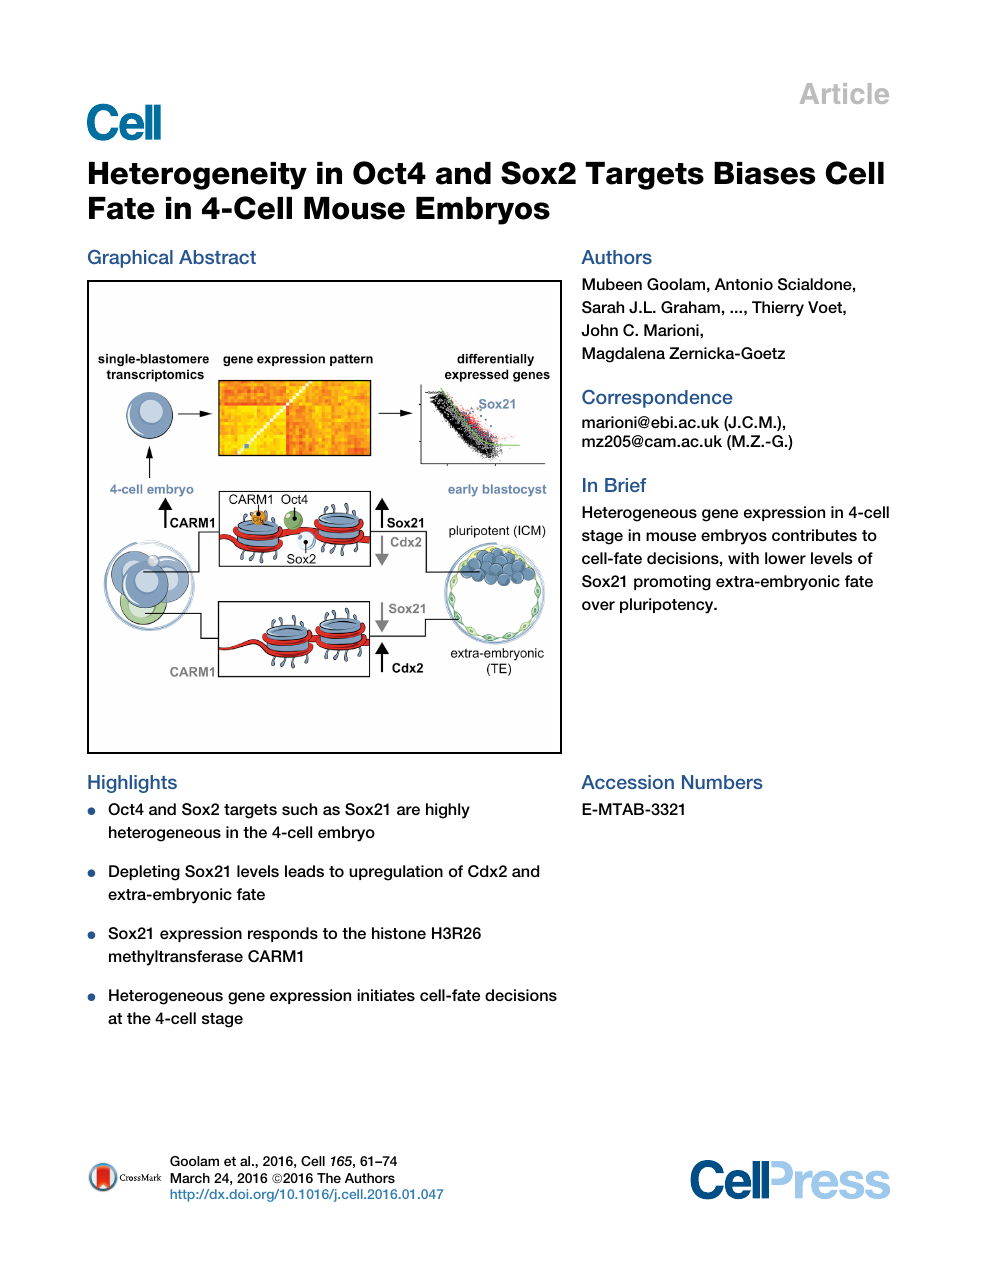 Heterogeneity In Oct4 And Sox2 Targets Biases Cell Fate In 4 Cell Mouse Embryos Topic Of Research Paper In Biological Sciences Download Scholarly Article Pdf And Read For Free On Cyberleninka Open